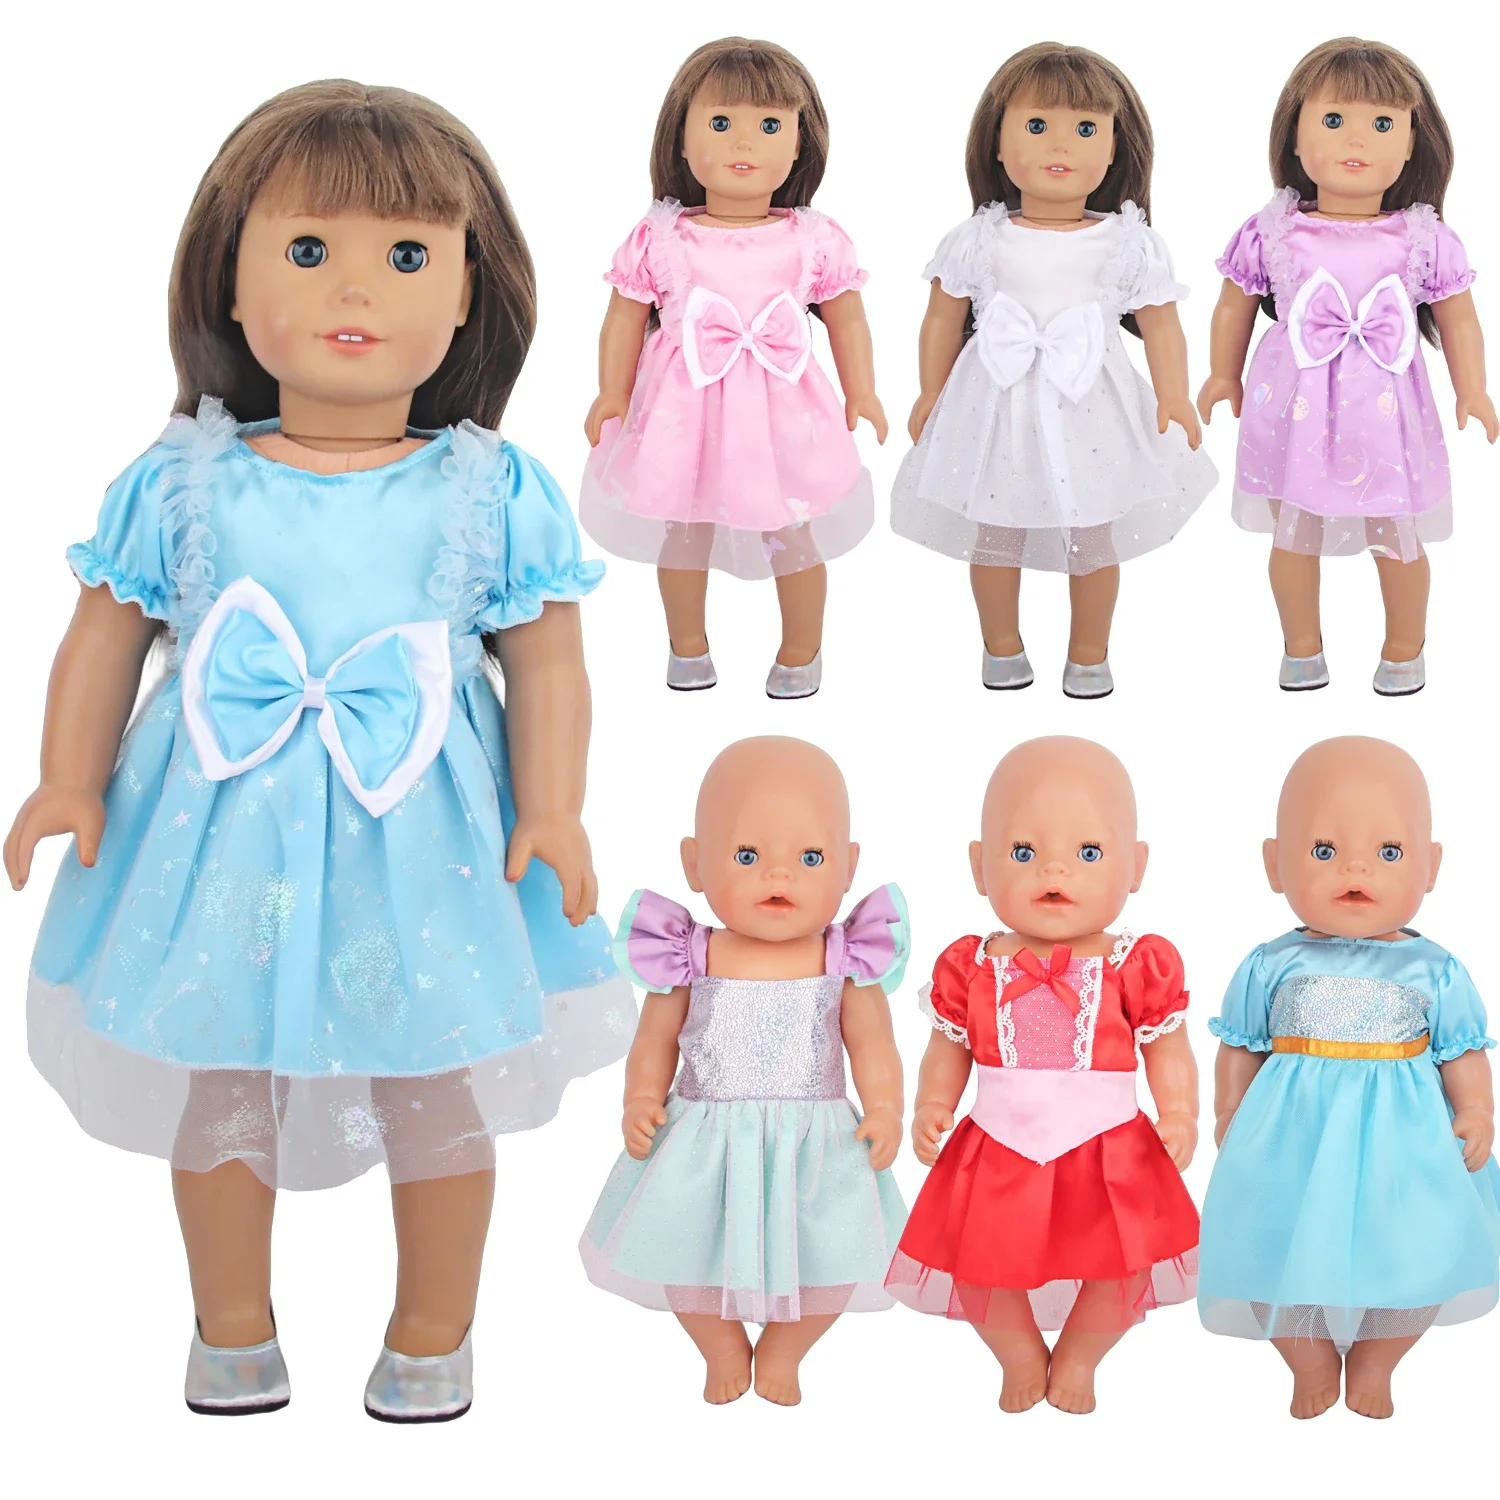 

Lovely Princess Doll Dress Clothes For 43cm Baby New Born Doll Cute Bow Skirt For American 18 Inch&OG,Life Girl Dolls KId's Gift